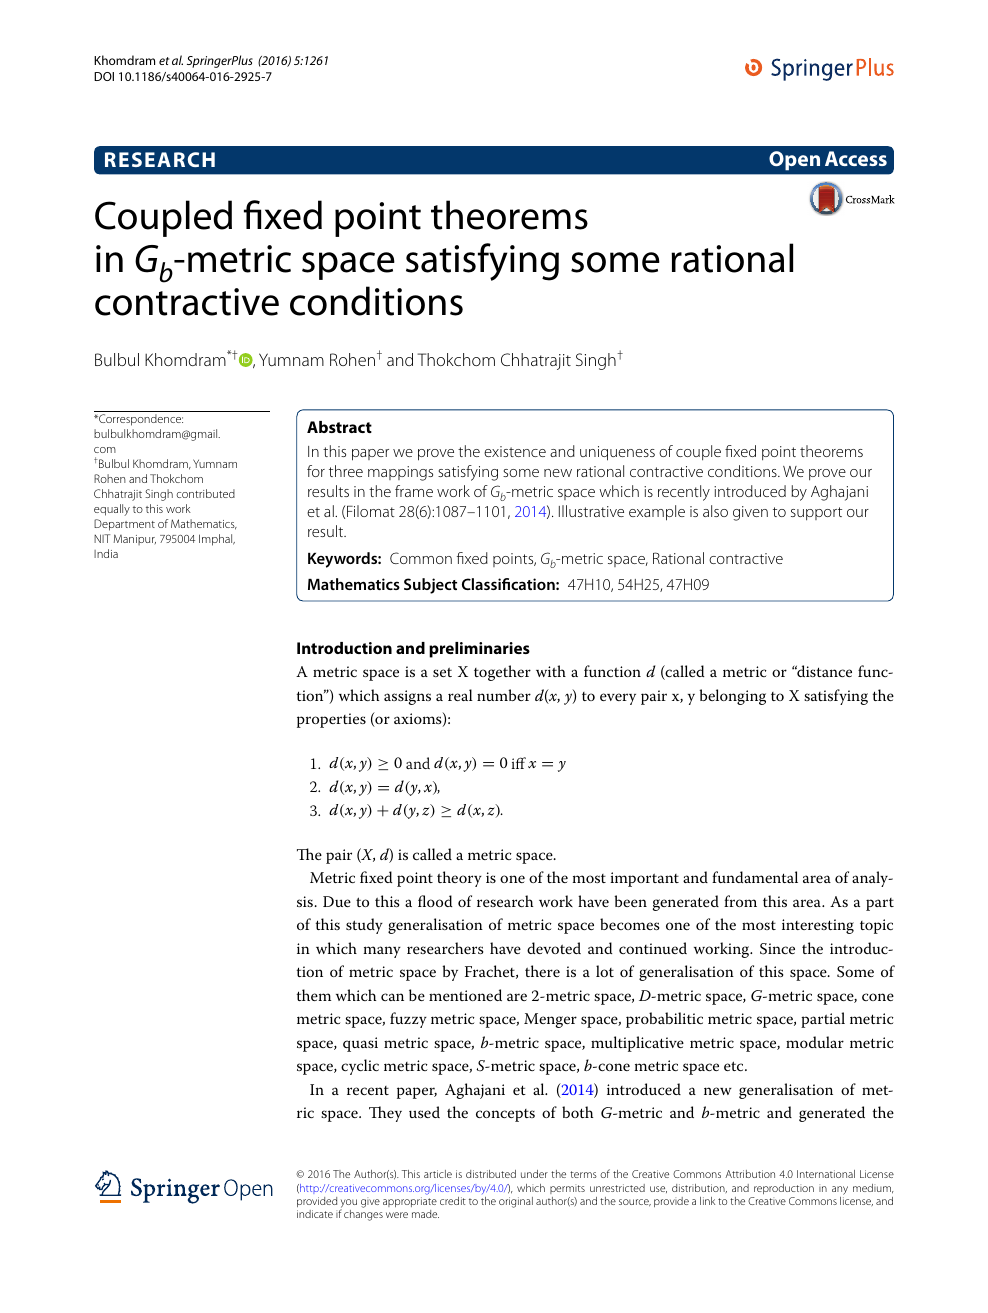 Coupled Fixed Point Theorems In G B Metric Space Satisfying Some Rational Contractive Conditions Topic Of Research Paper In Mathematics Download Scholarly Article Pdf And Read For Free On Cyberleninka Open